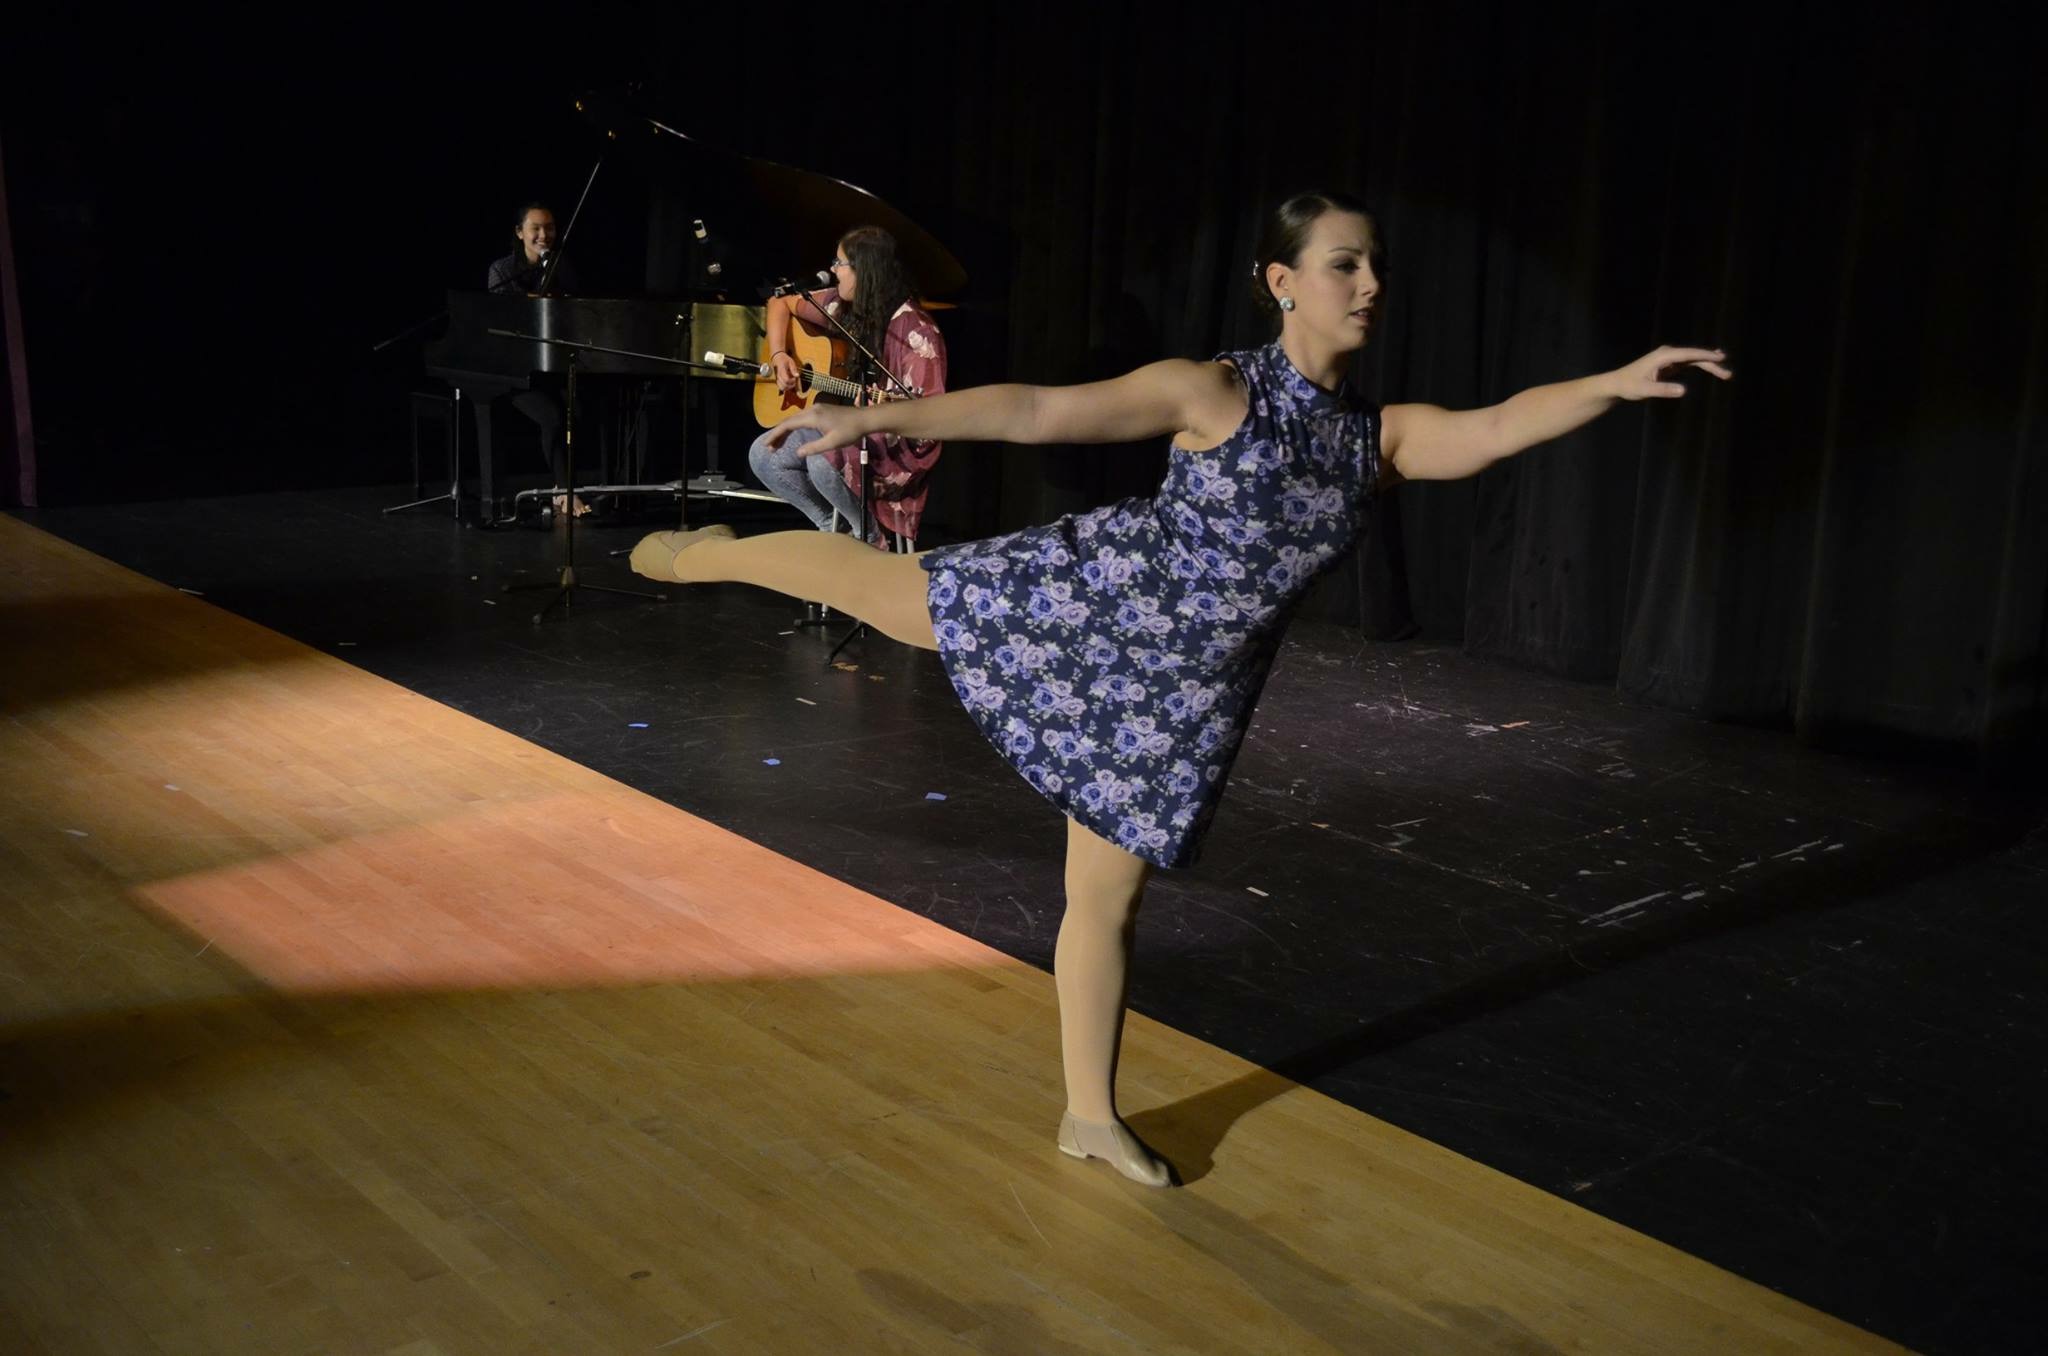 From the left, Seniors Madeline Lam, Sarah Vieira, and Ashley Vieira are pictured performing a singing and dancing trio. Photo by Danielle Copson.